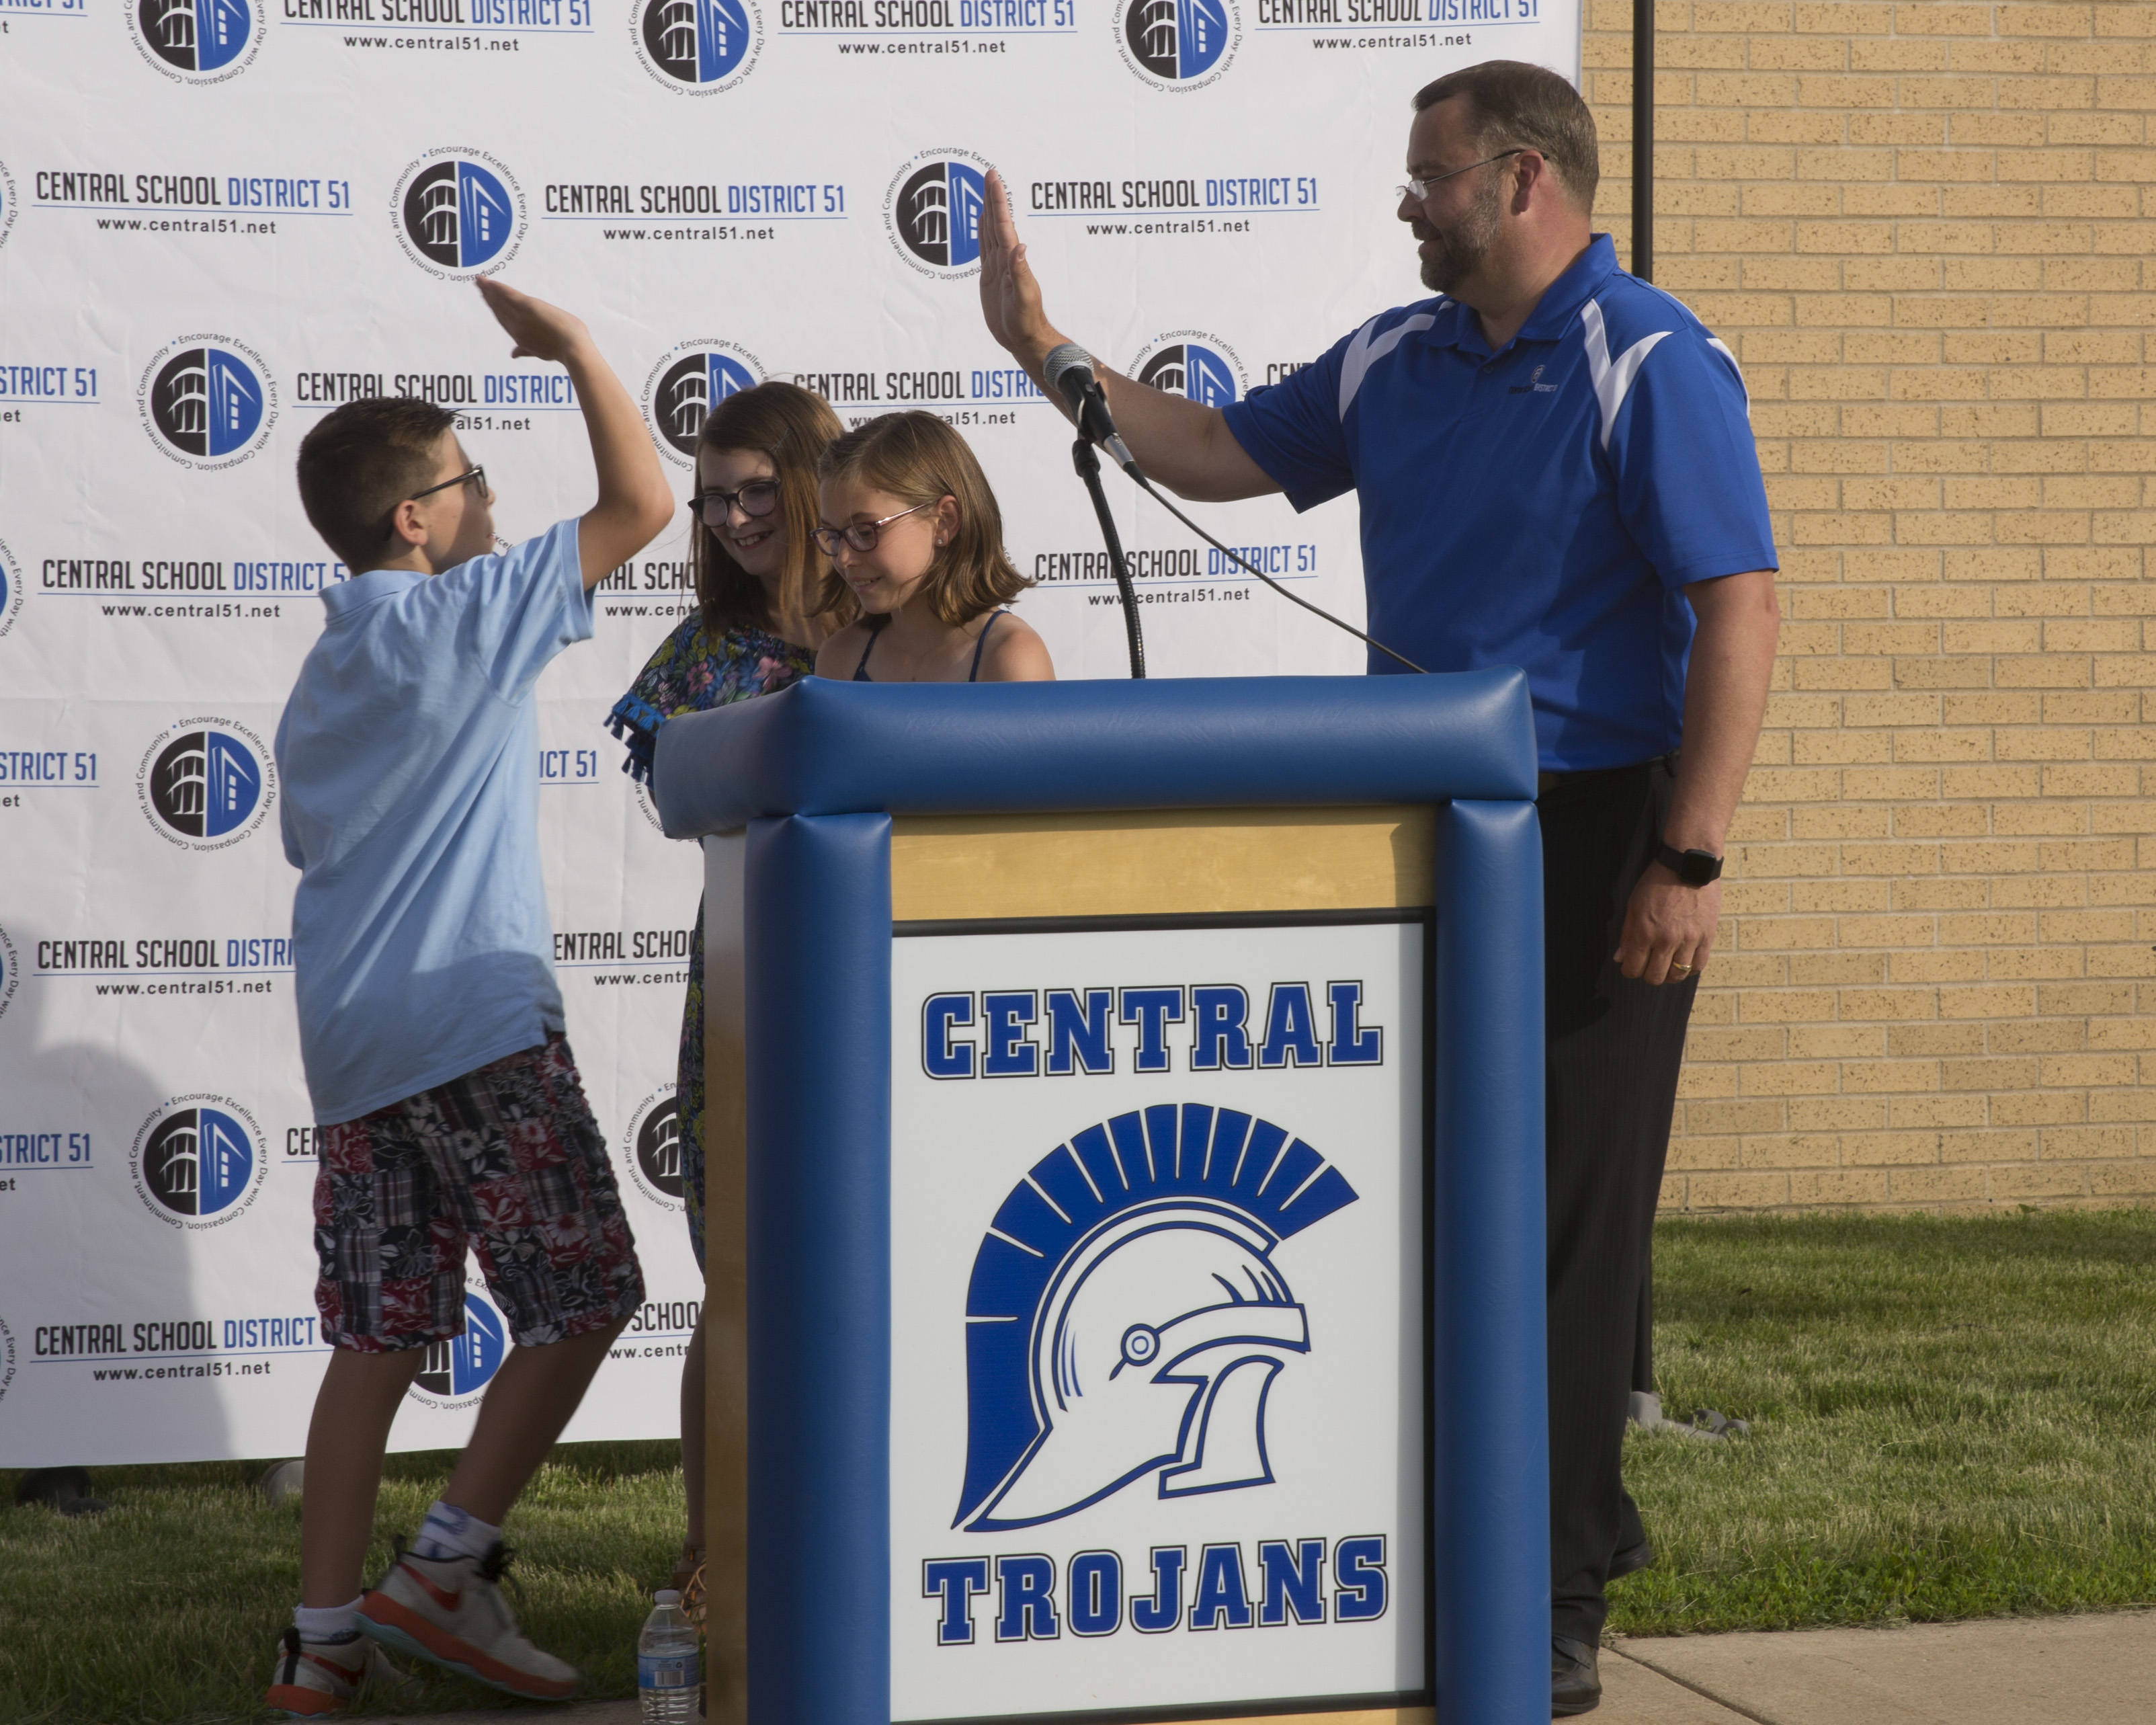 The same three little kids going off the stage and one of the high fiving the superintendent.